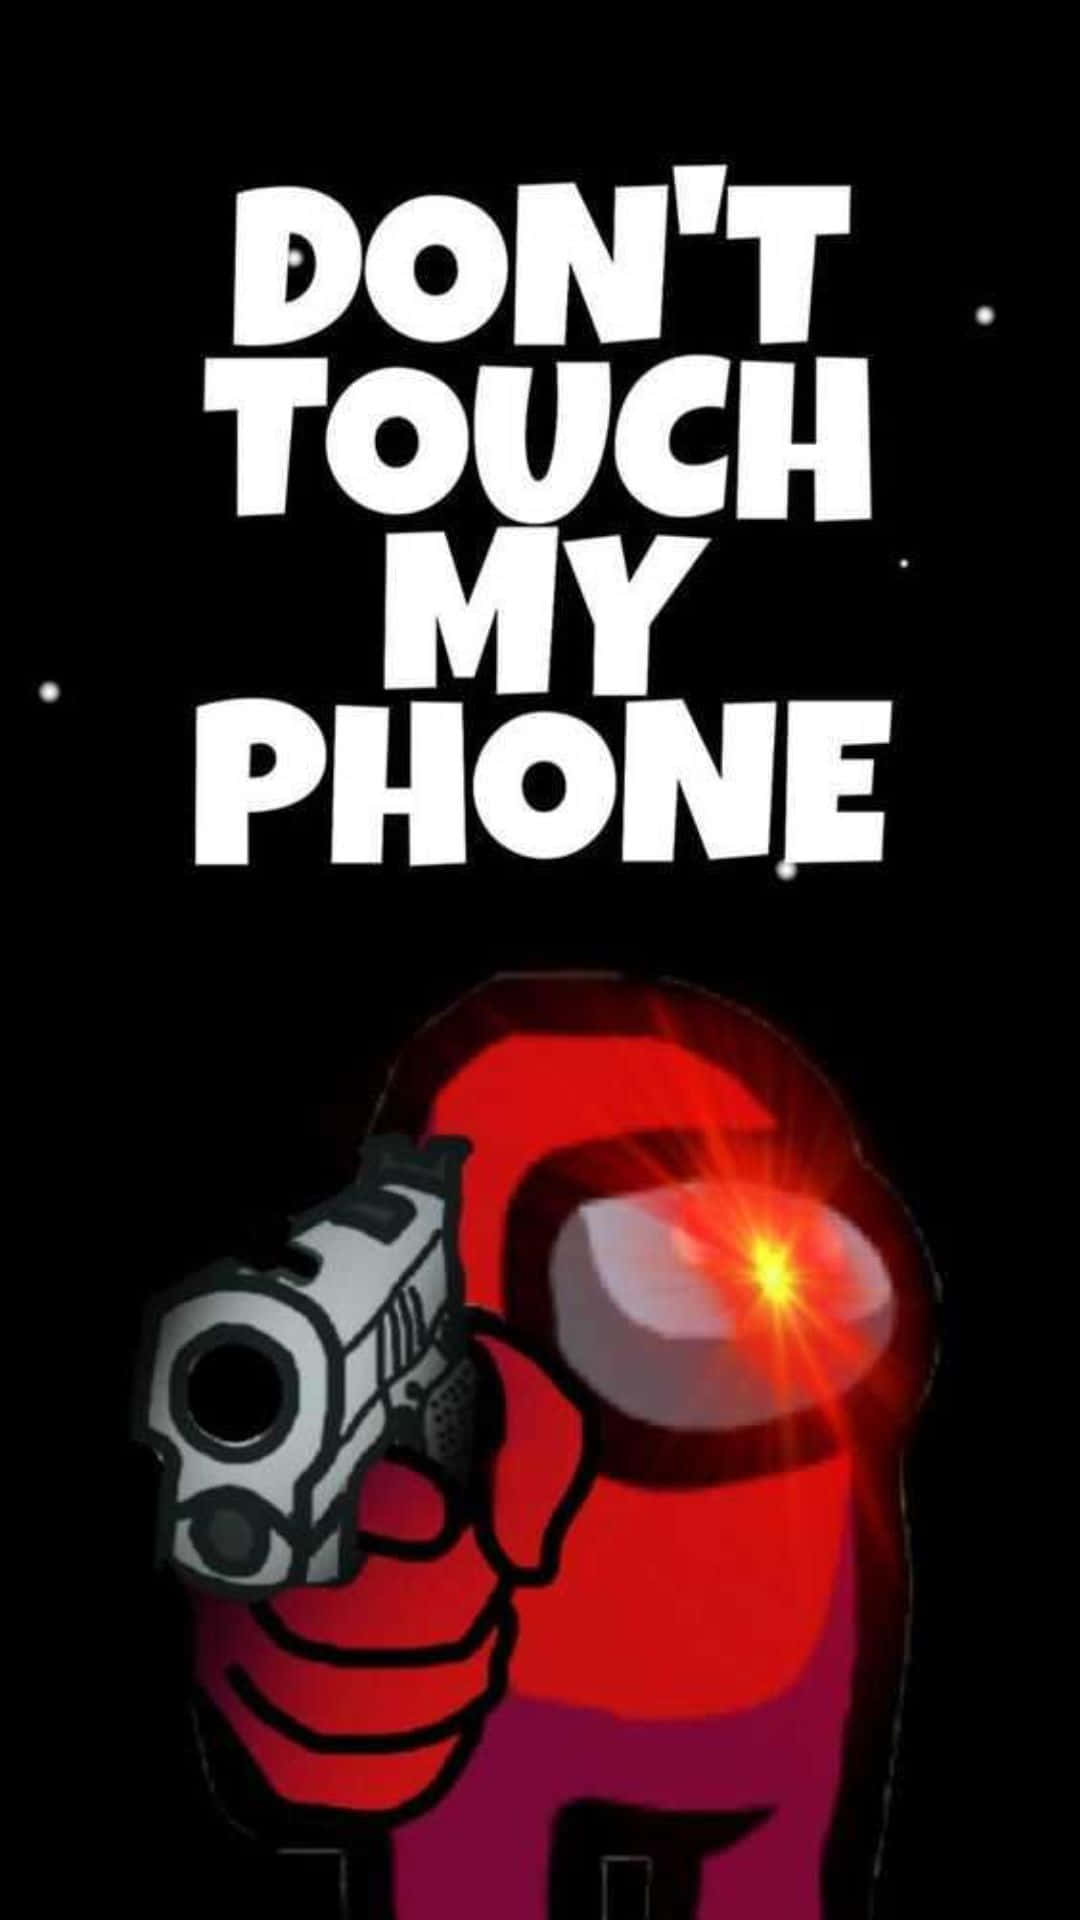 Don't Touch My Phone - Screenshot Background